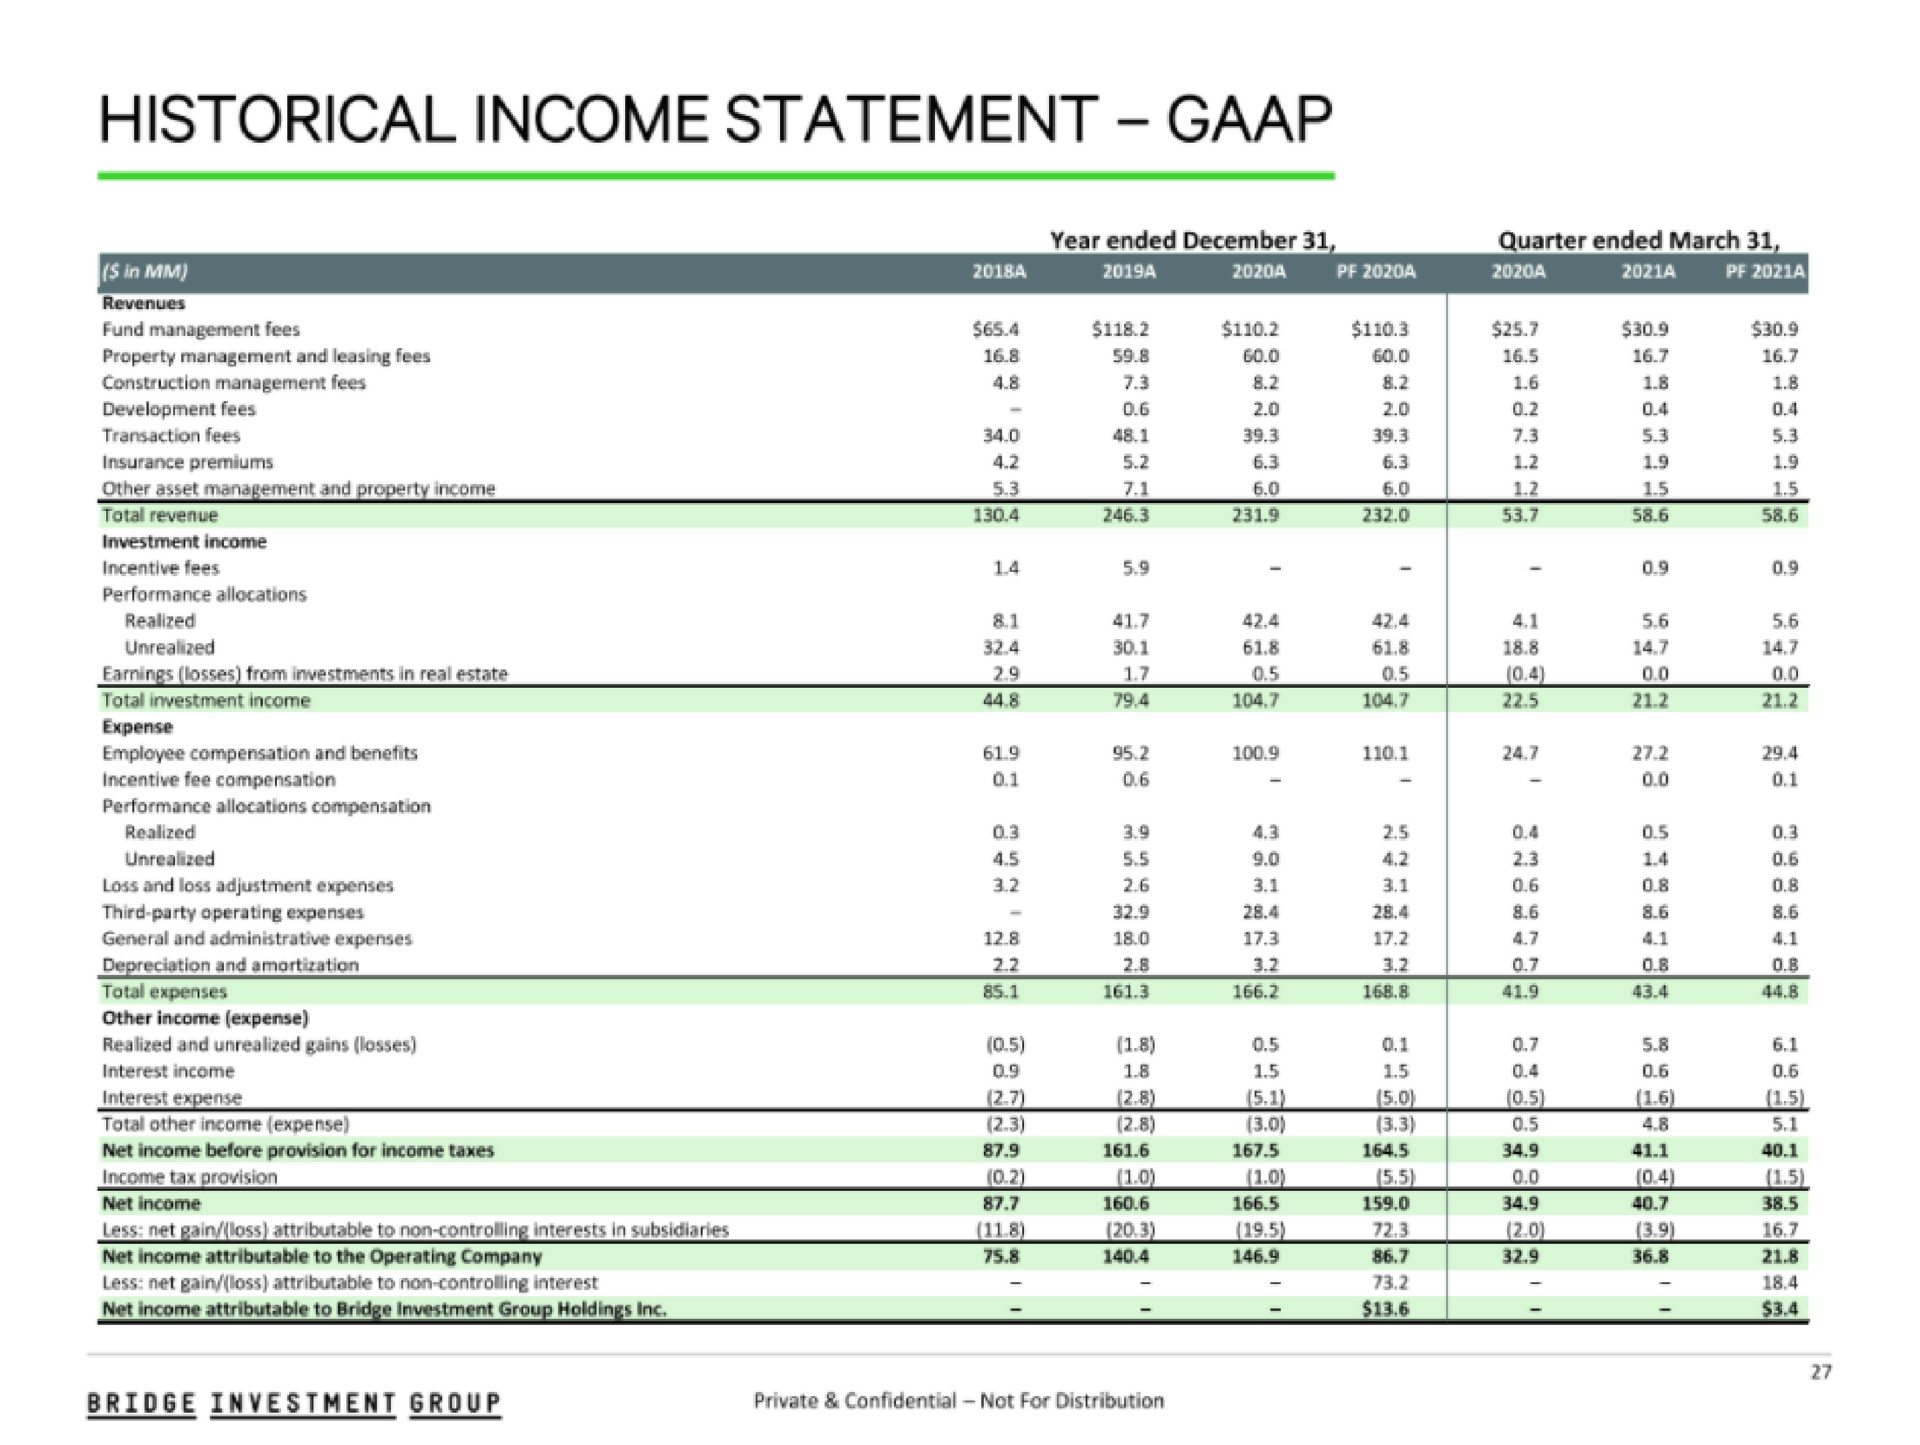 historical income statement | Bridge Investment Group